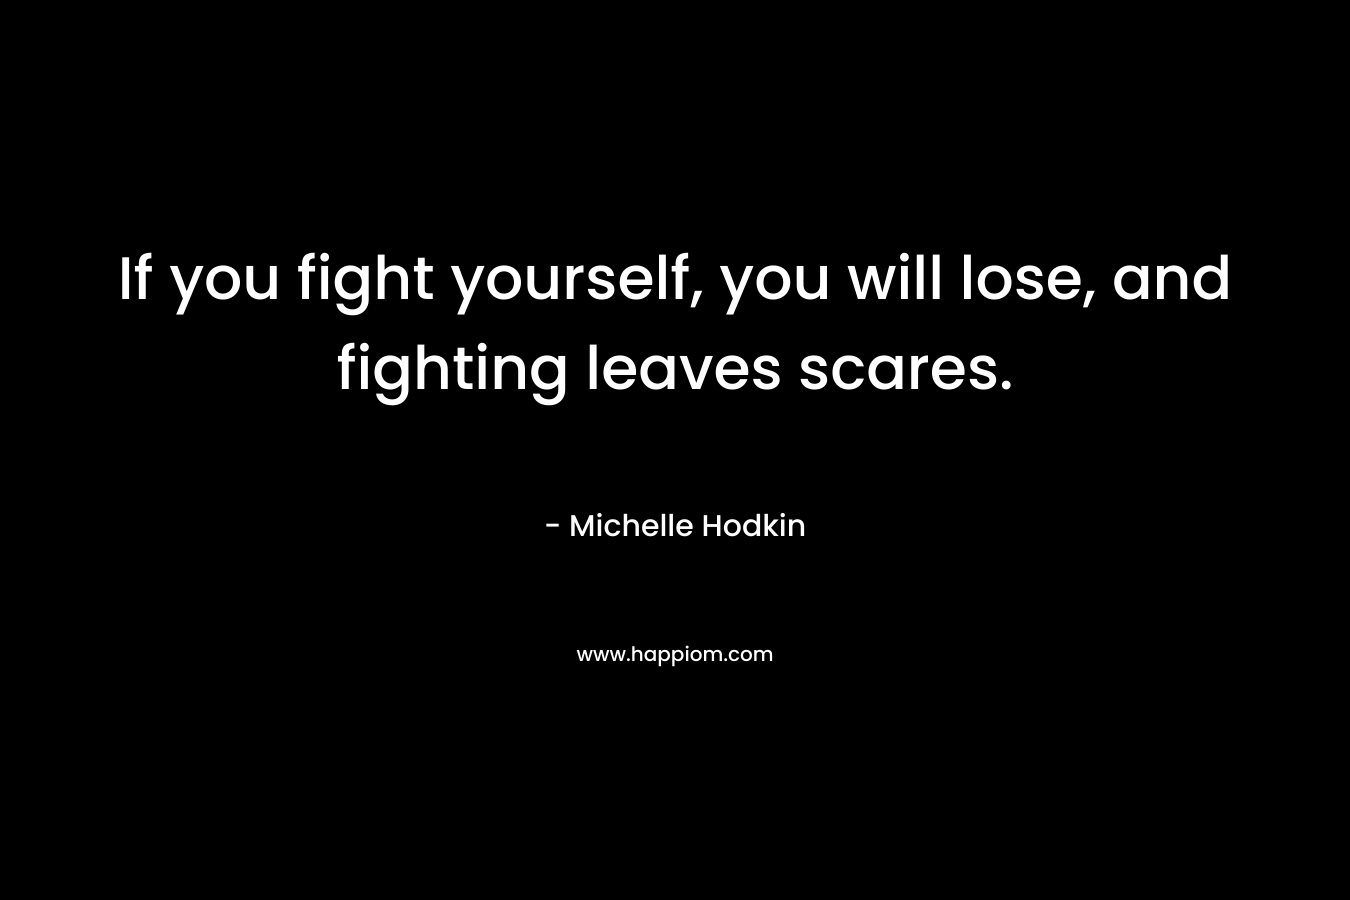 If you fight yourself, you will lose, and fighting leaves scares.